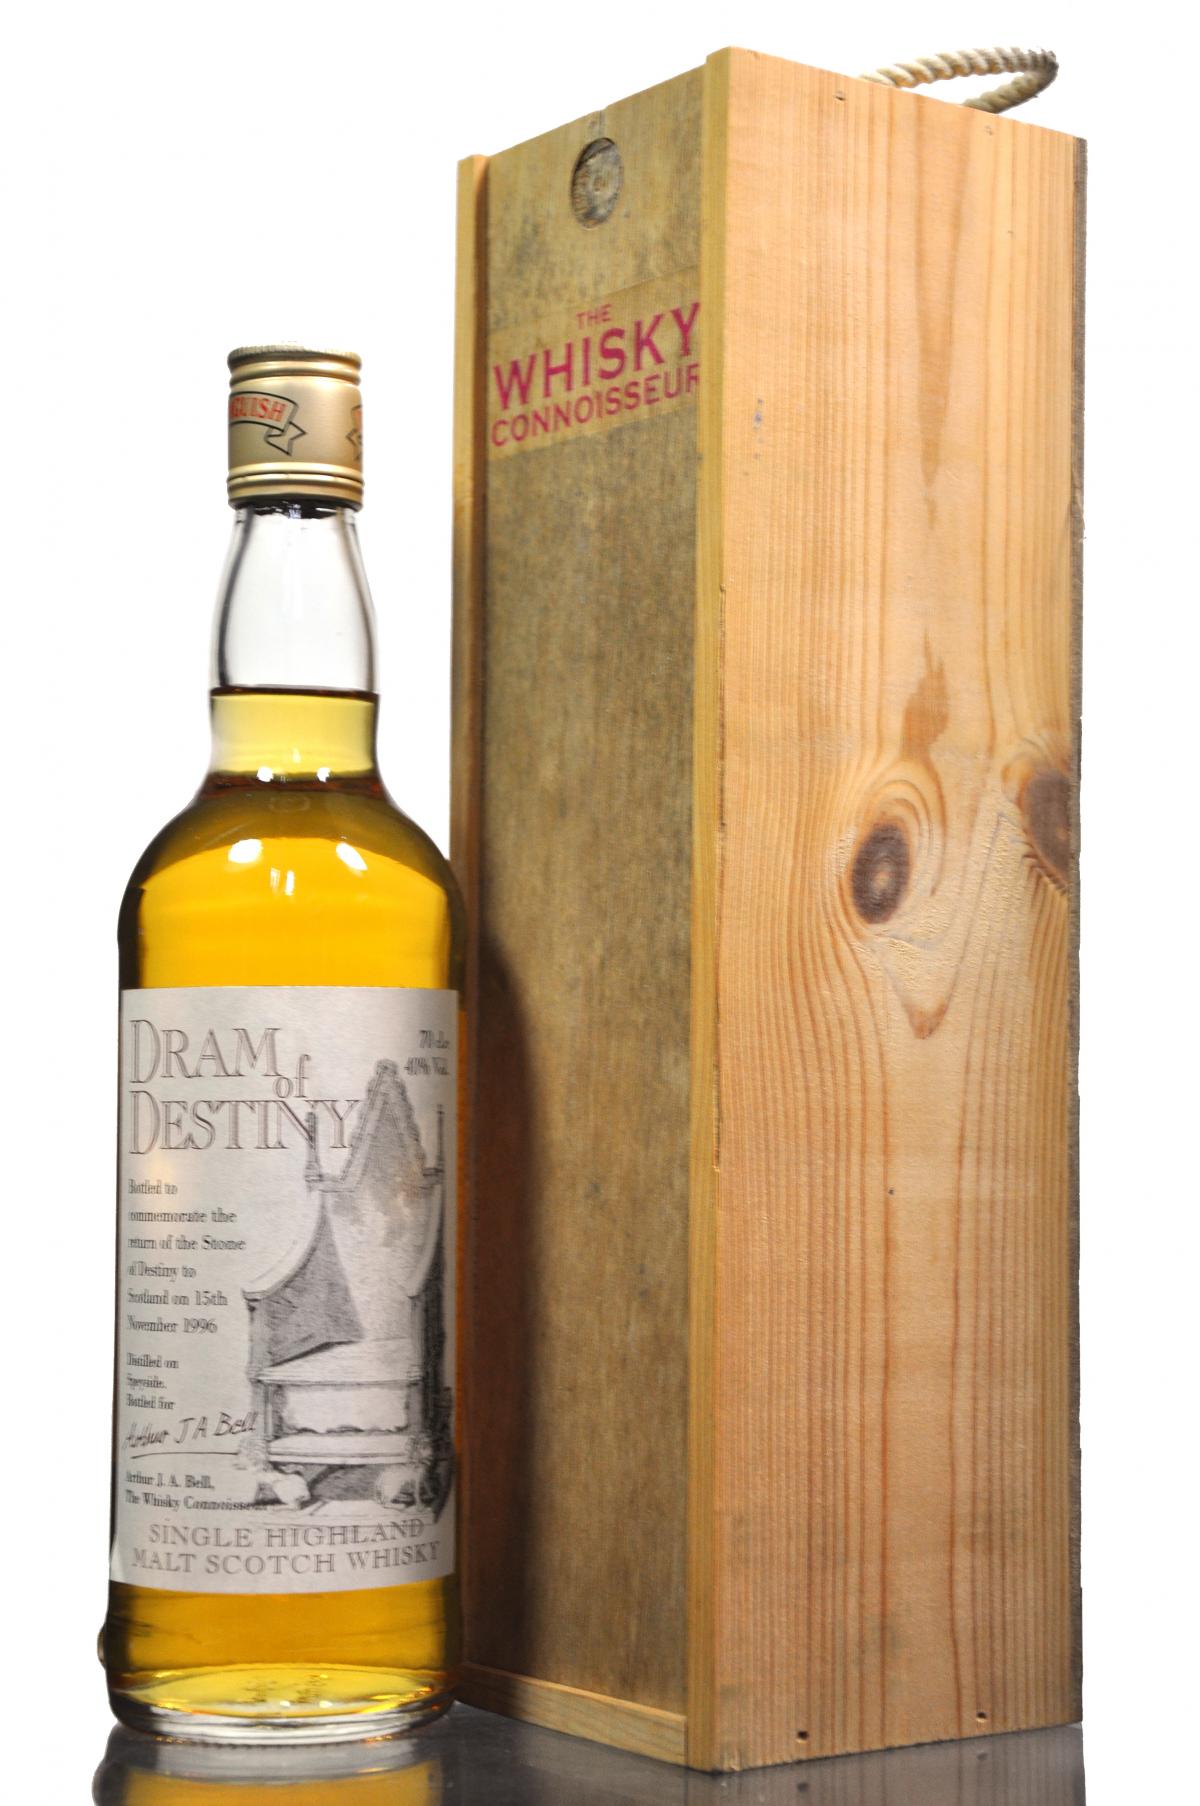 Dram Of Destiny - The Whisky Connoisseur - Limited Edition - 1996 Release